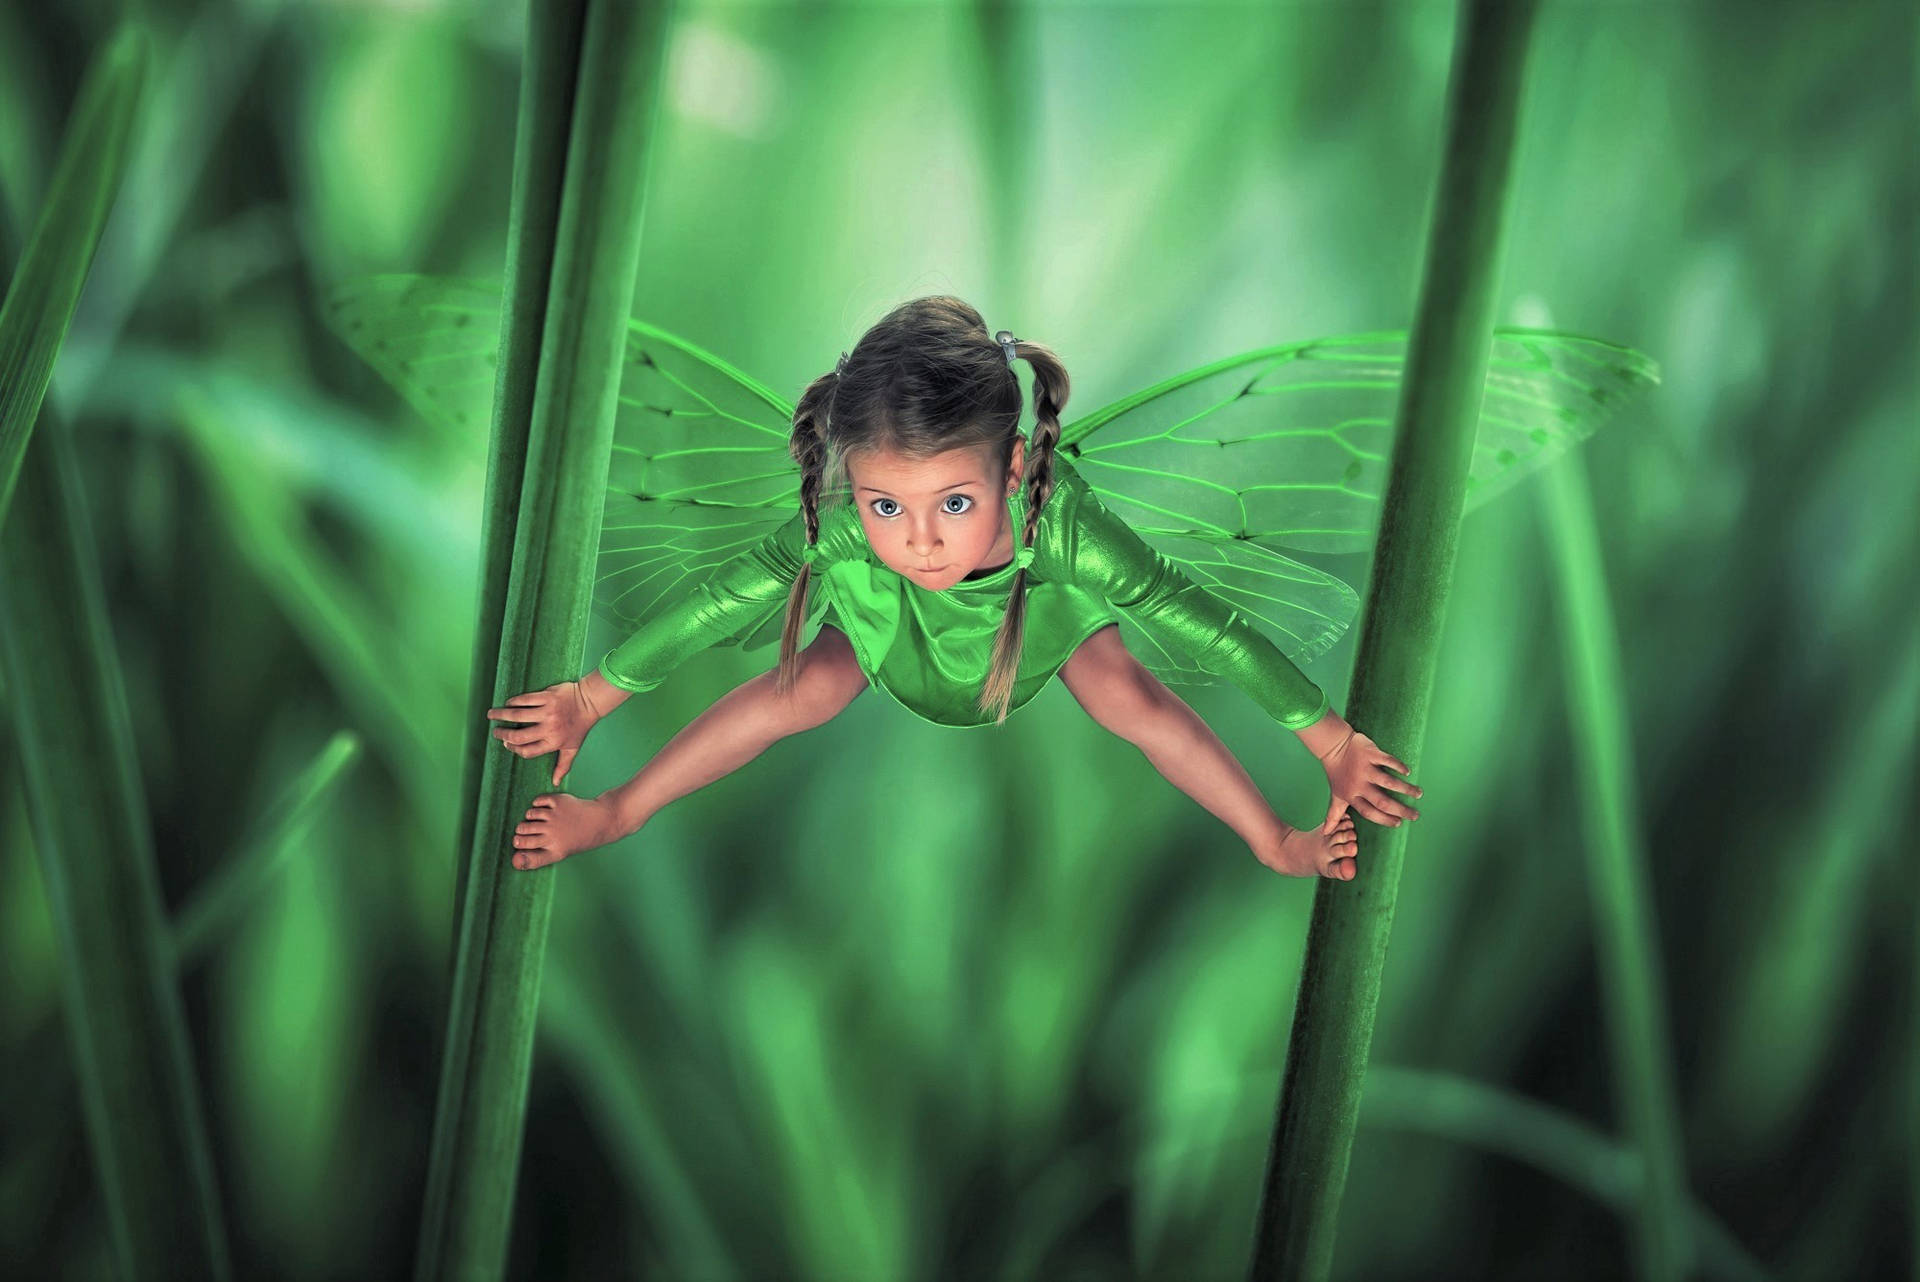 Awesome Photoshop Fairy Child Wallpaper